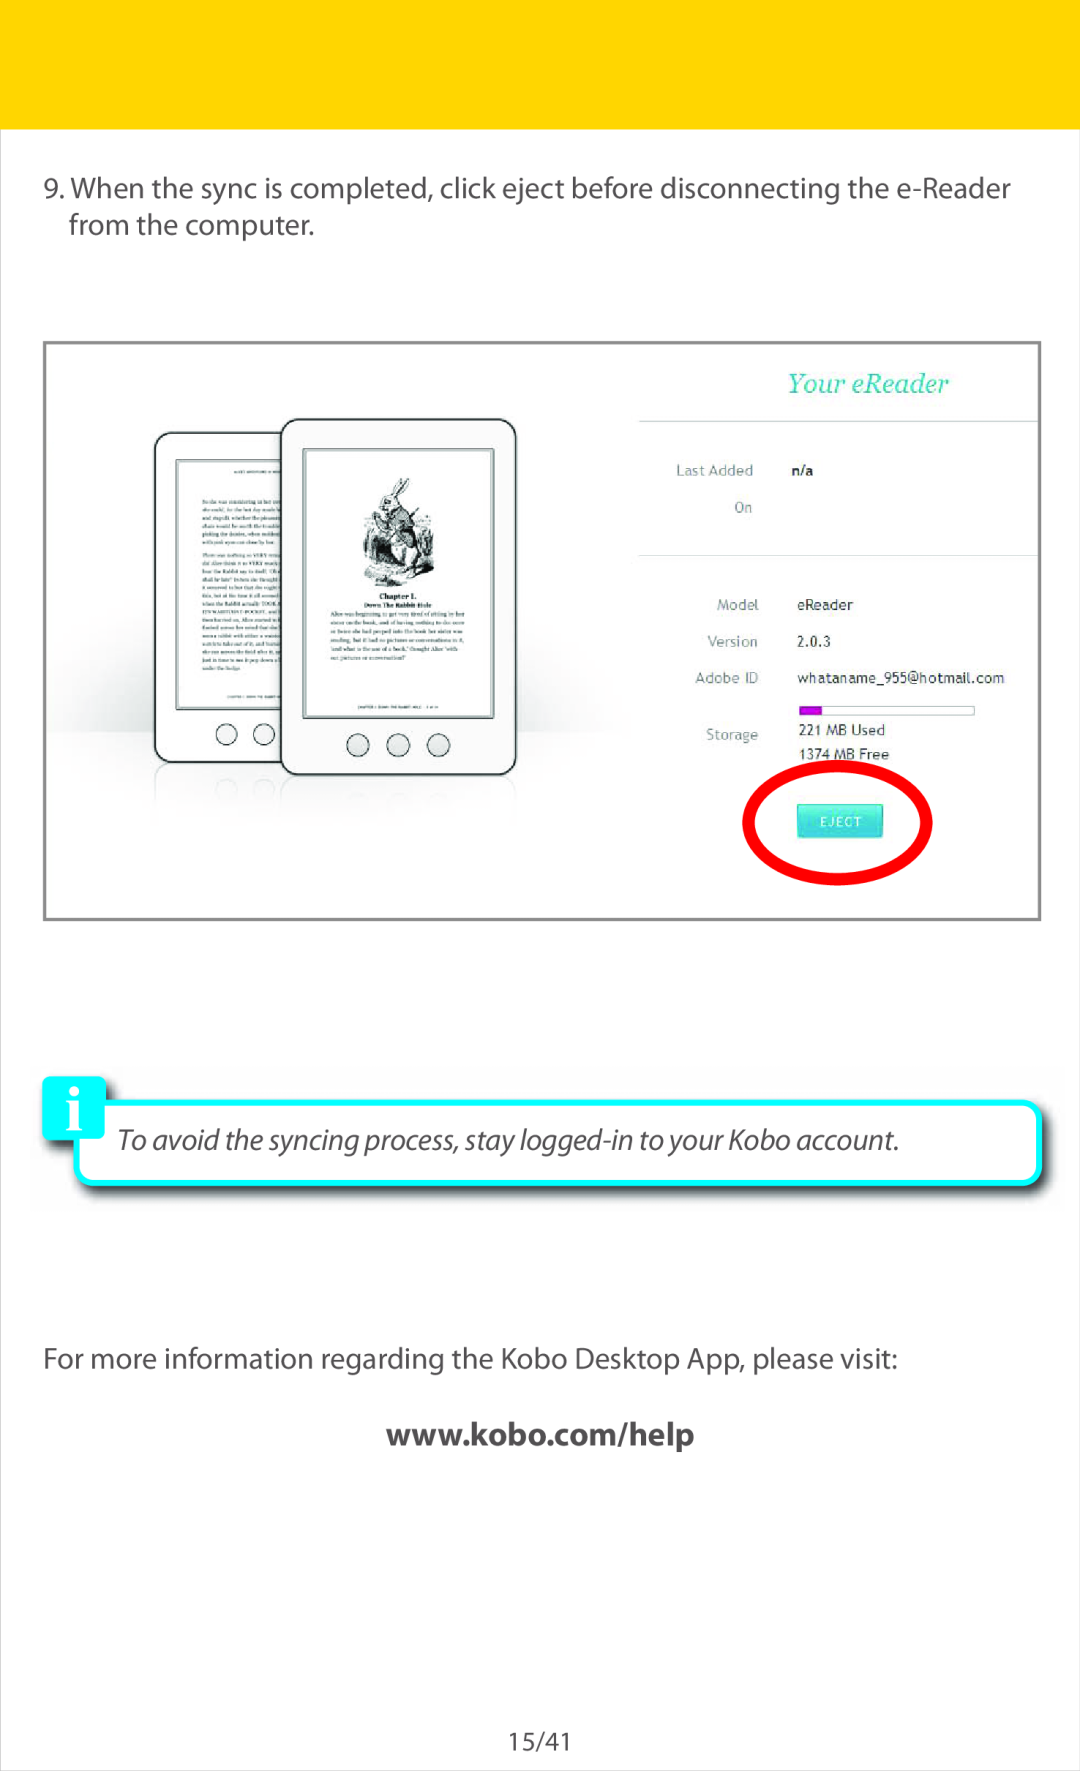 Slick ER701 manual To avoid the syncing process, stay logged-in to your Kobo account 